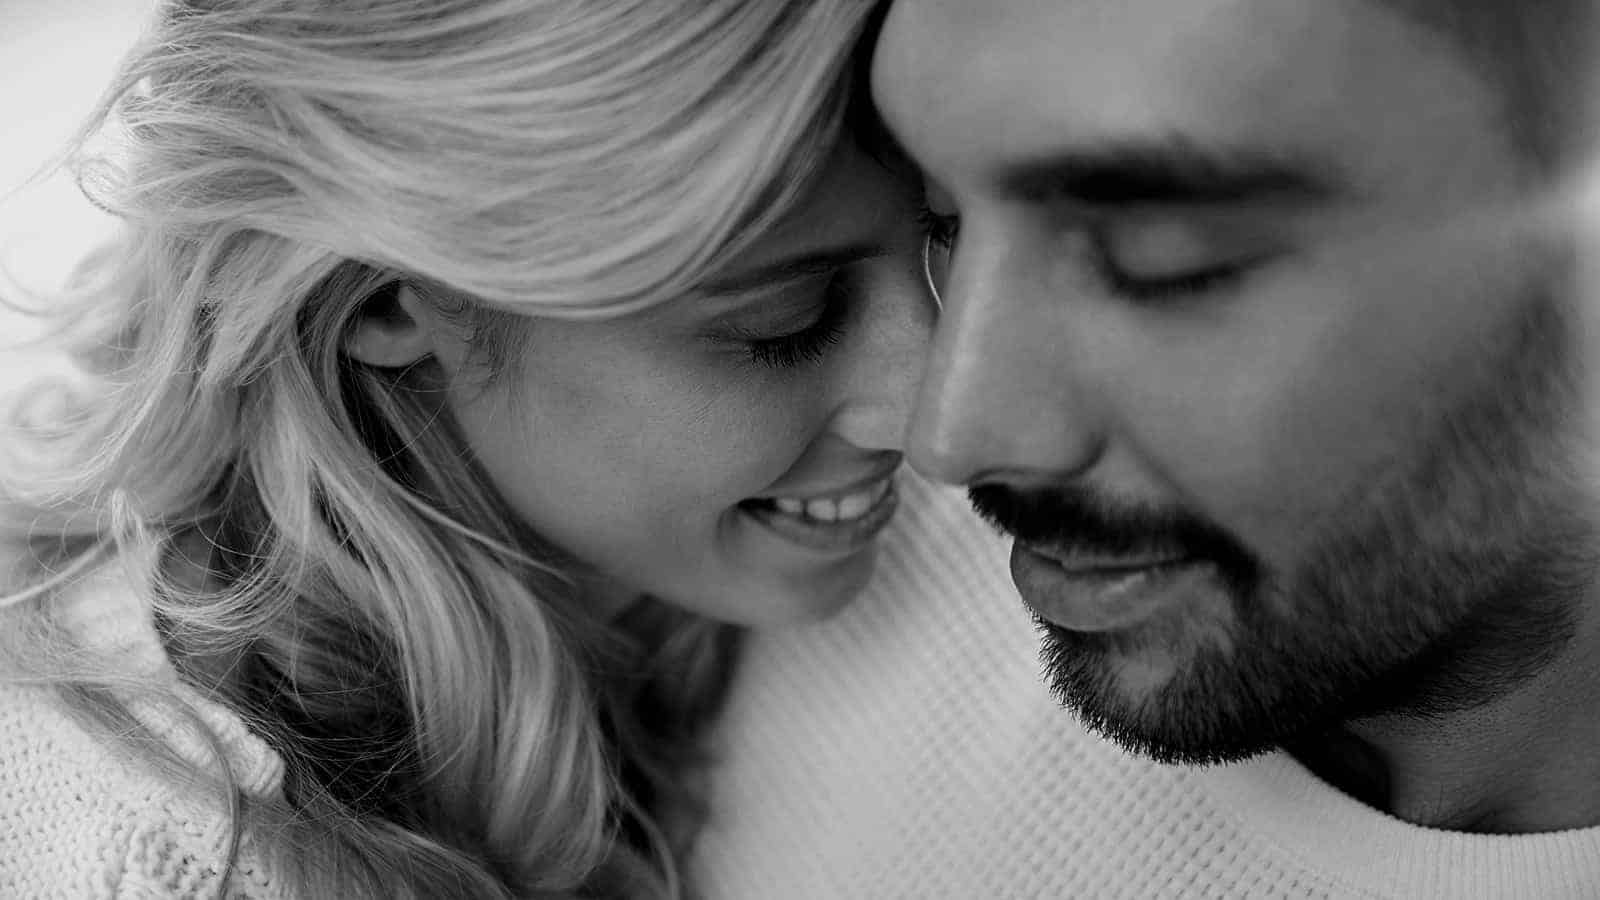 How To Build Intimacy In Your Relationship, According To Relationship Experts